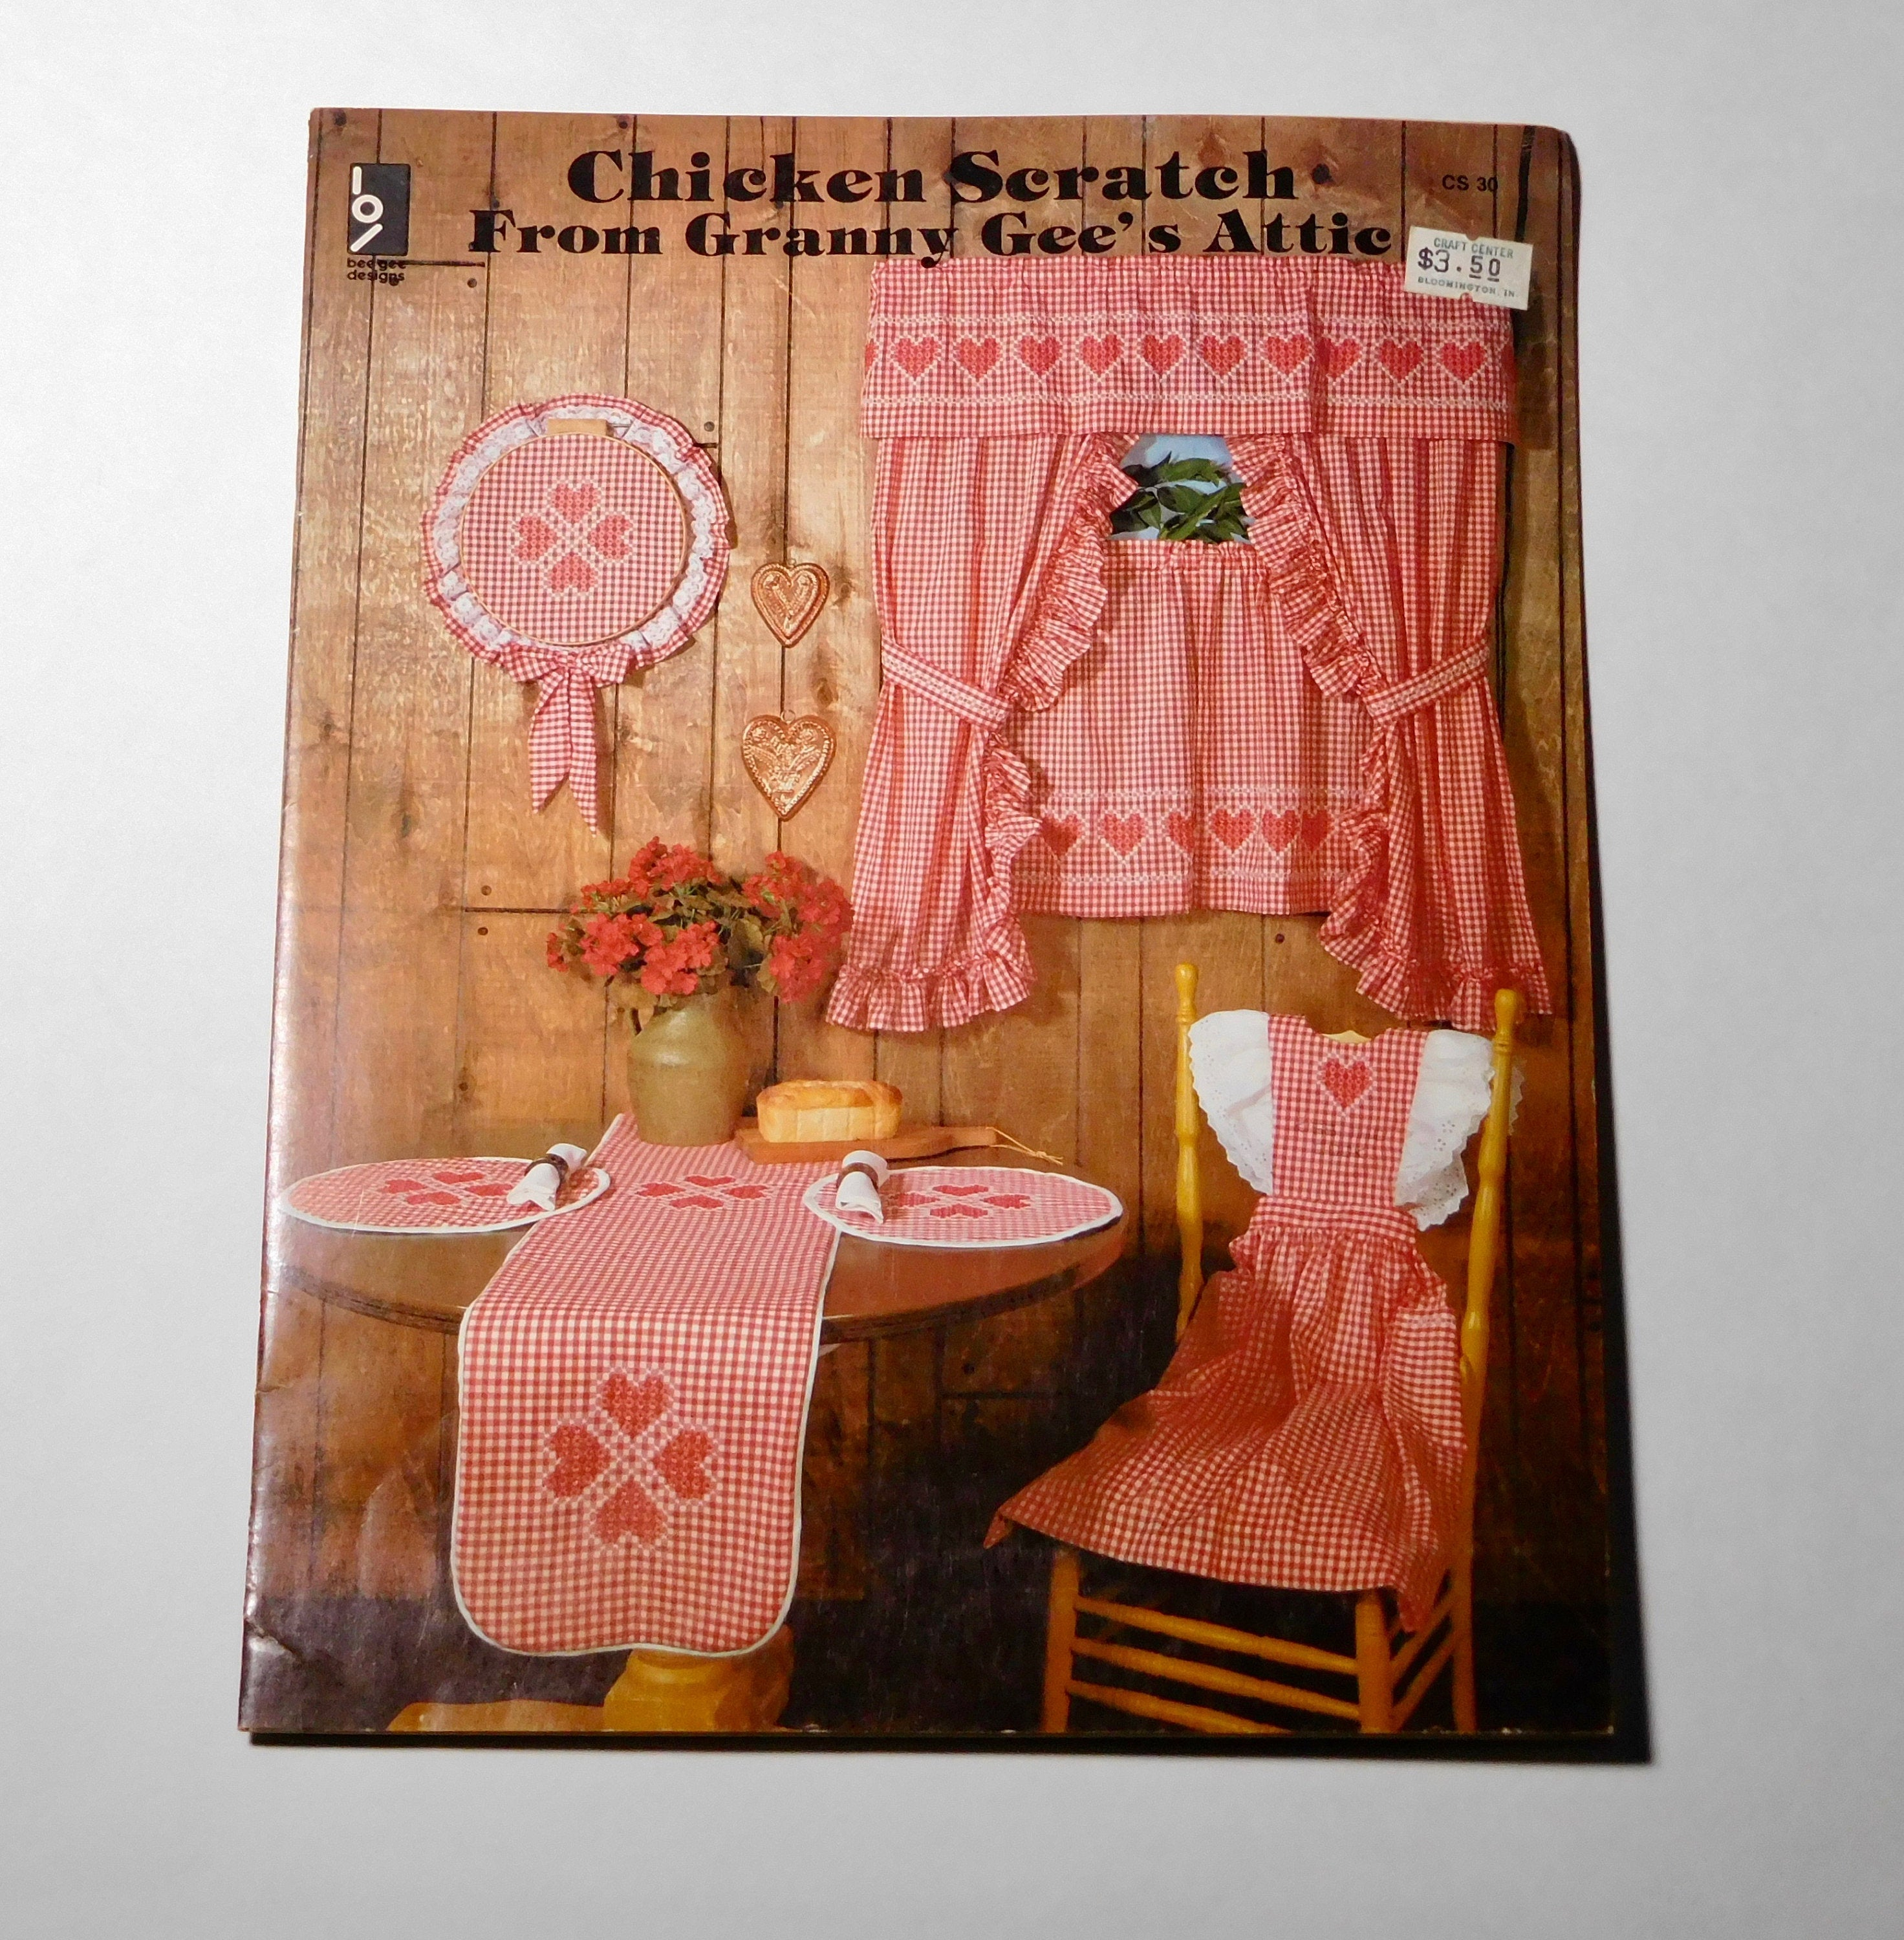 Gingham Embroidery Patterns Chicken Scratches From Granny Gees Attic Embroidery Patterns Gingham Amish Embroidery Hoover Lace